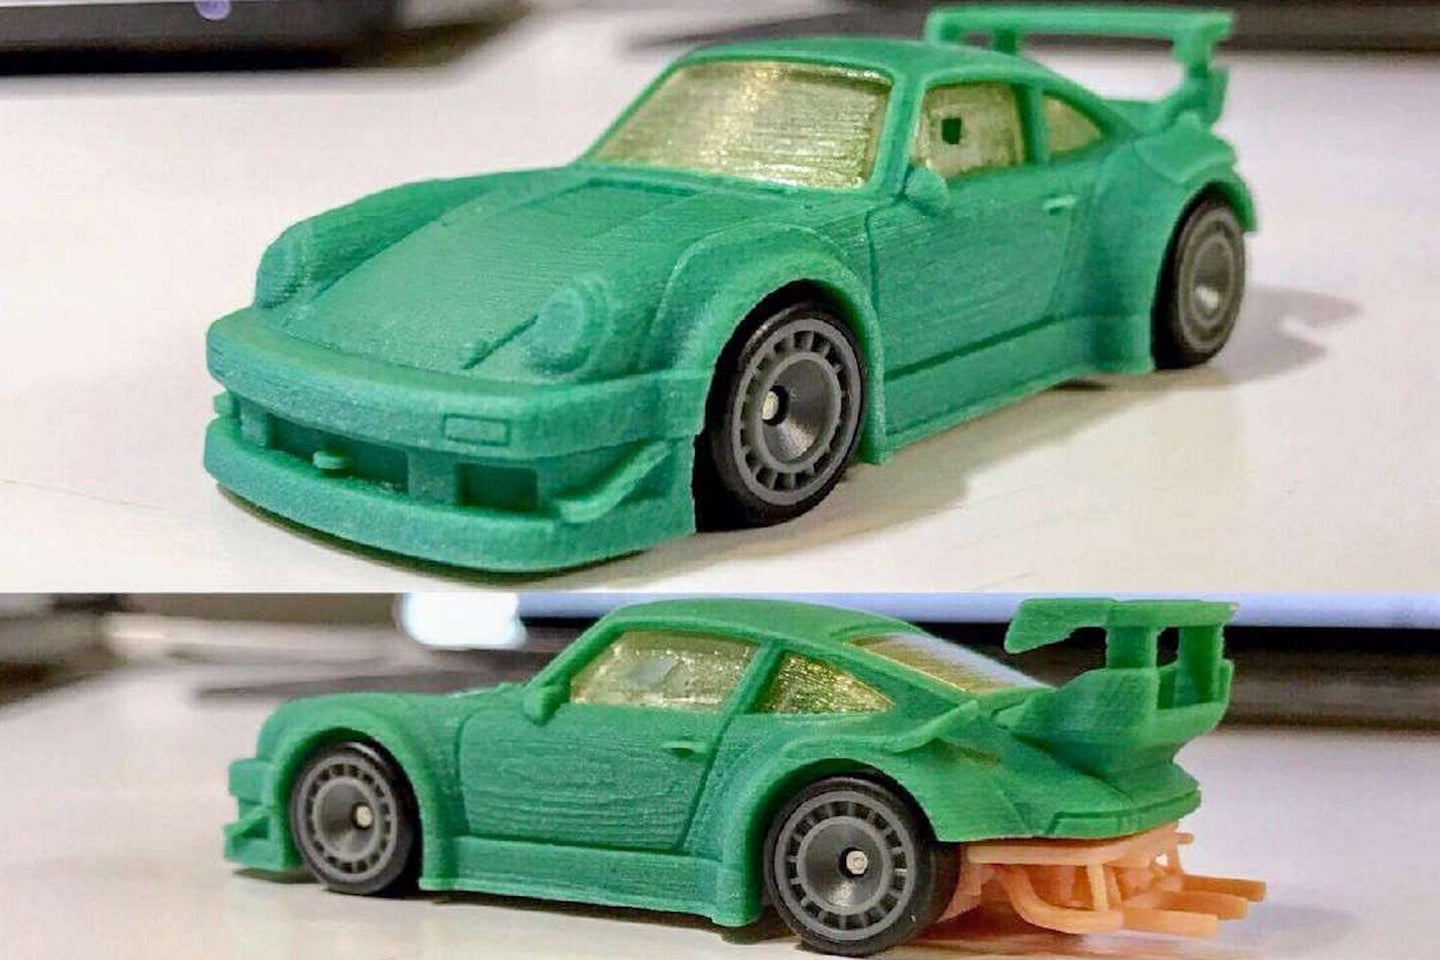 Exclusive: A Behind-the-Scenes Look at the Upcoming Rauh Welt Begriff Porsche 911 Hot Wheels